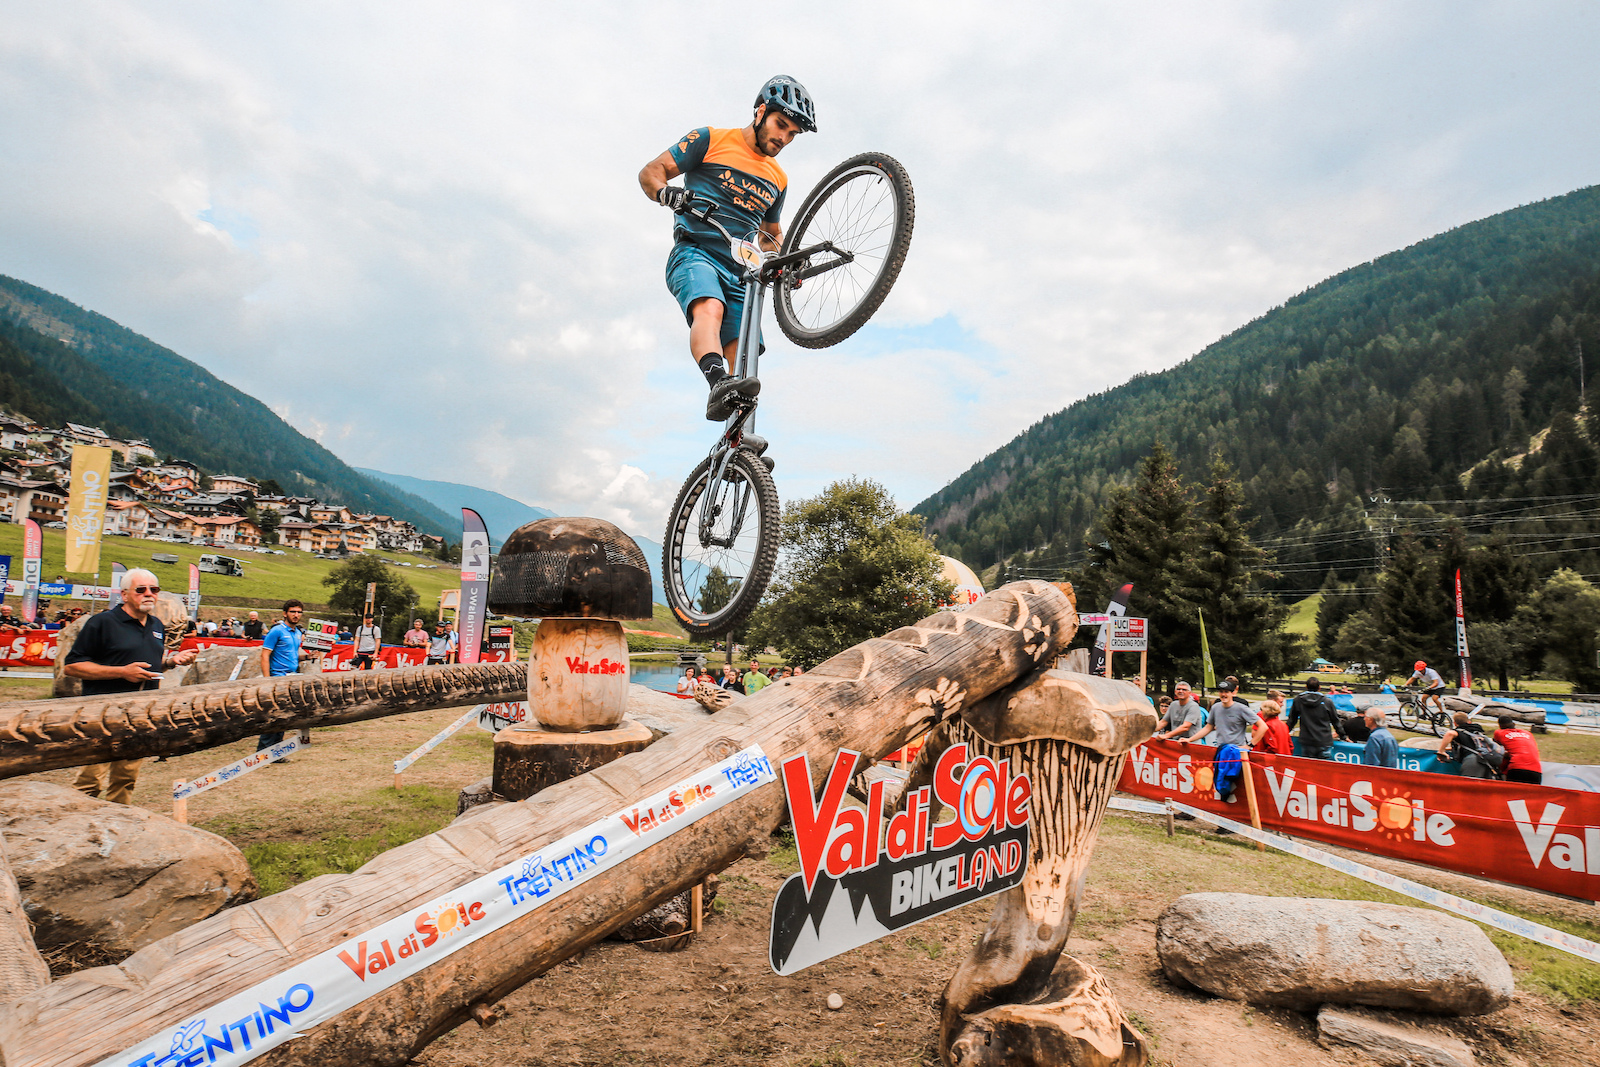 Pol riding in the semifinals of the UCI Trials World Cup in Val di Sole